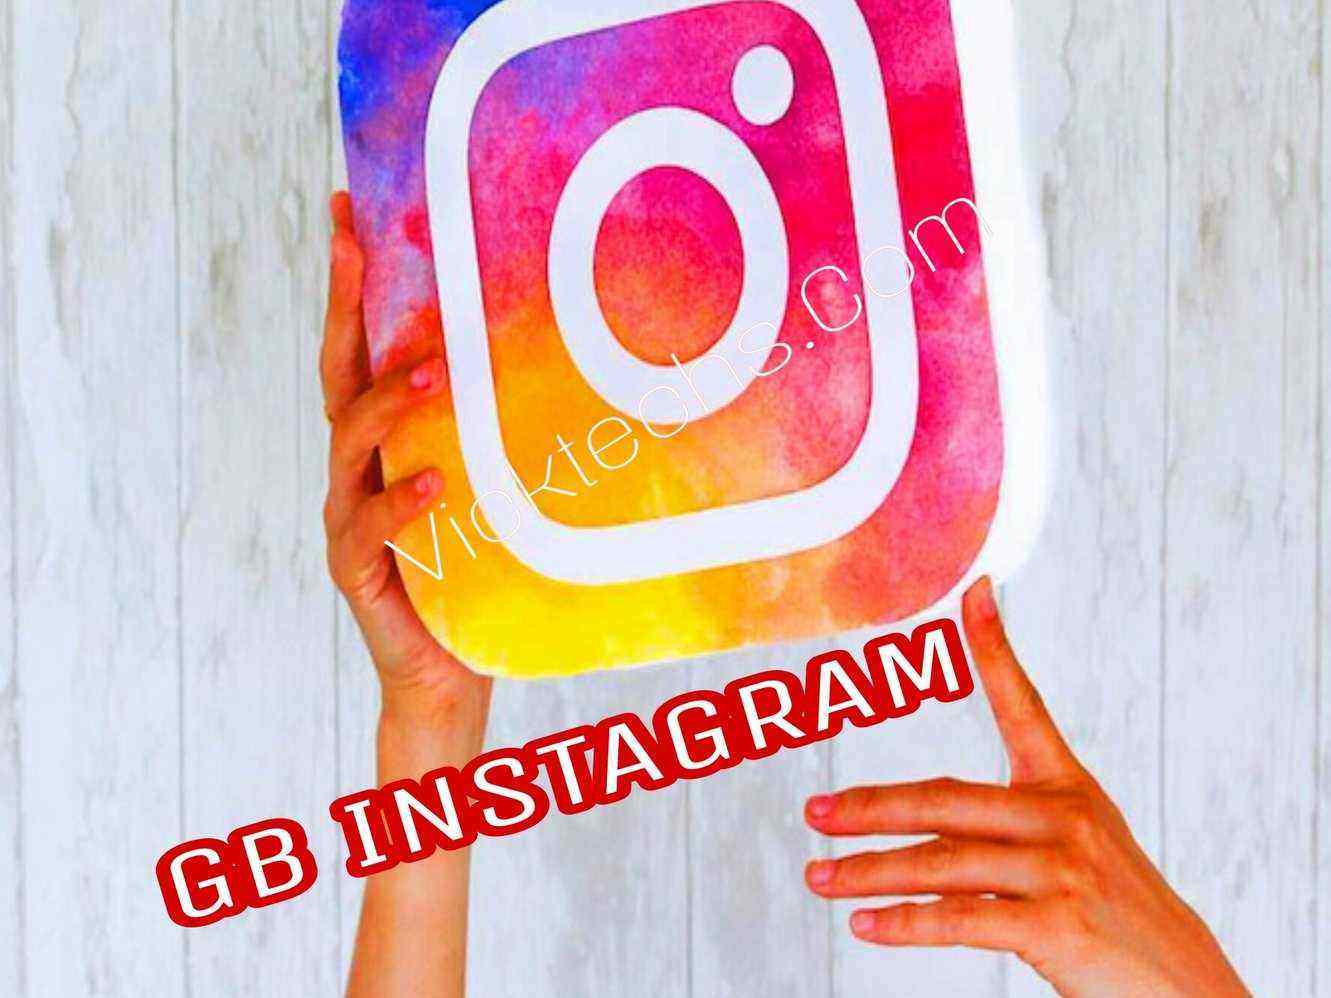 Download Latest GB Instagram V12 Apk New Features Added